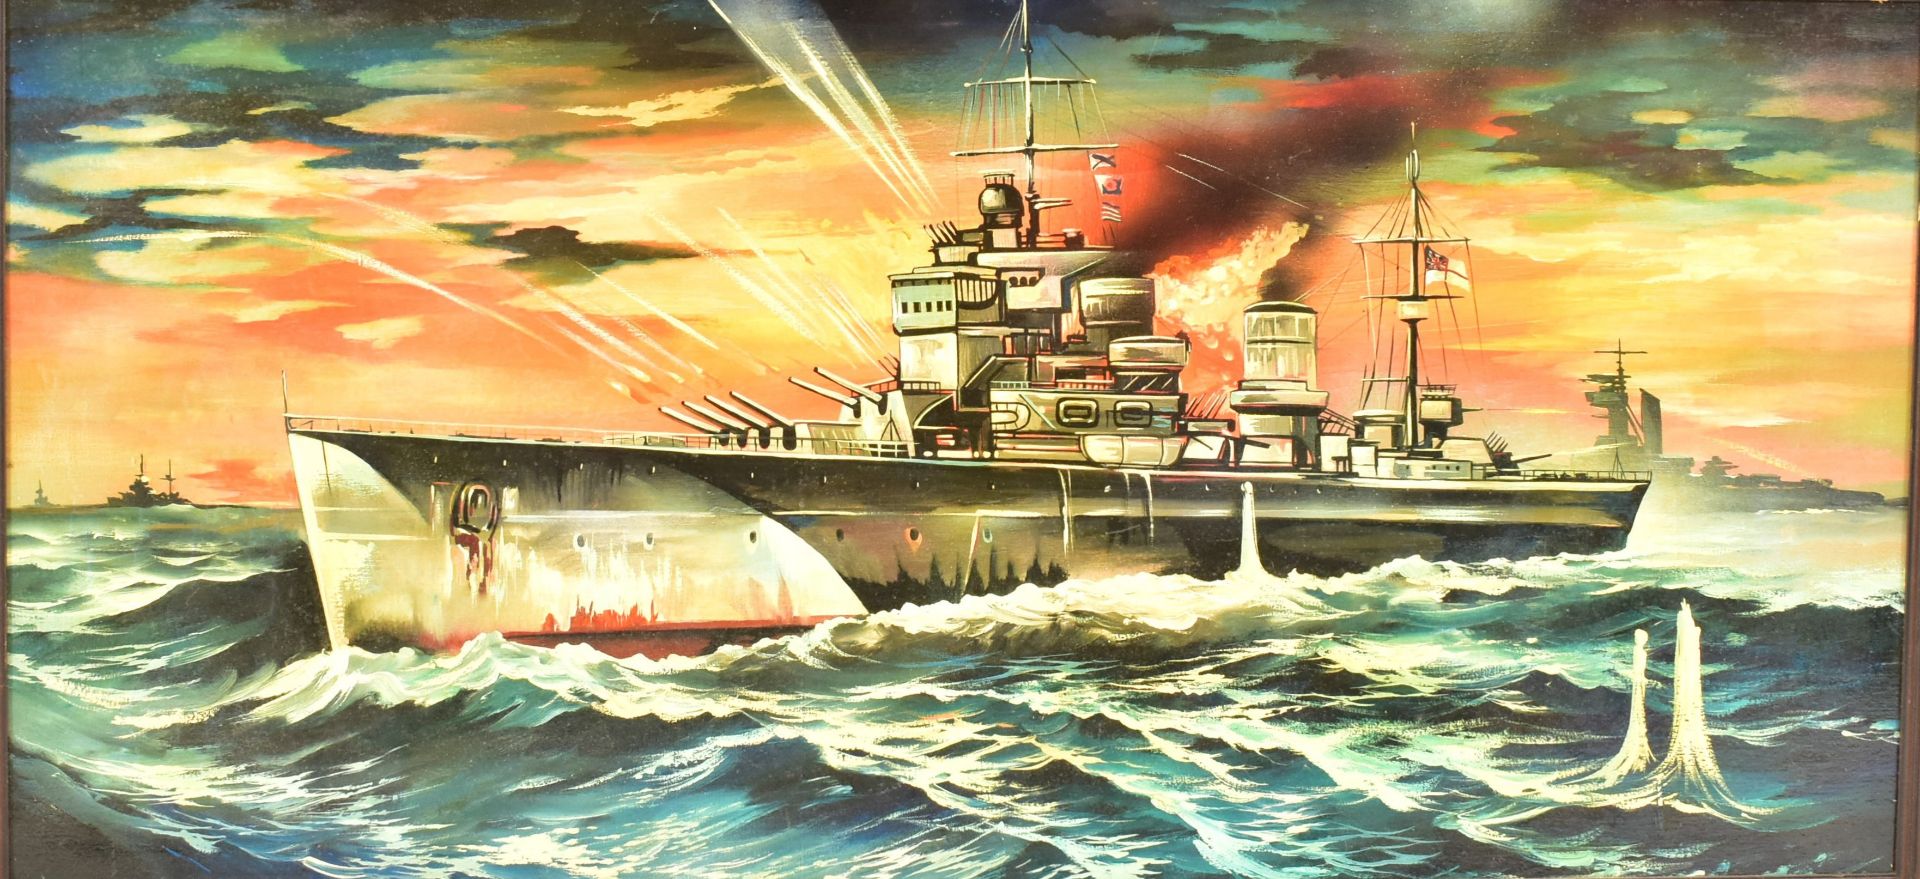 EARLY 2000S RUSSIAN OIL ON BOARD BATTLESHIP PAINTING